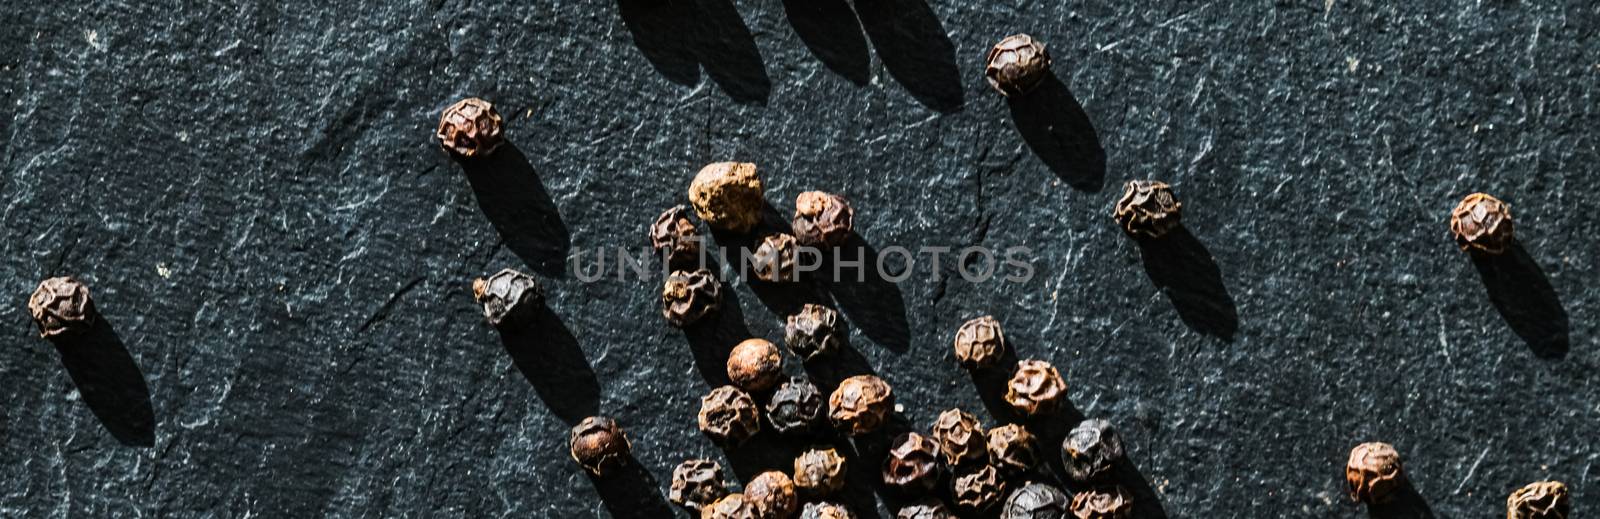 Black pepper closeup on luxury stone background as flat lay, dry food spices and recipe ingredient by Anneleven